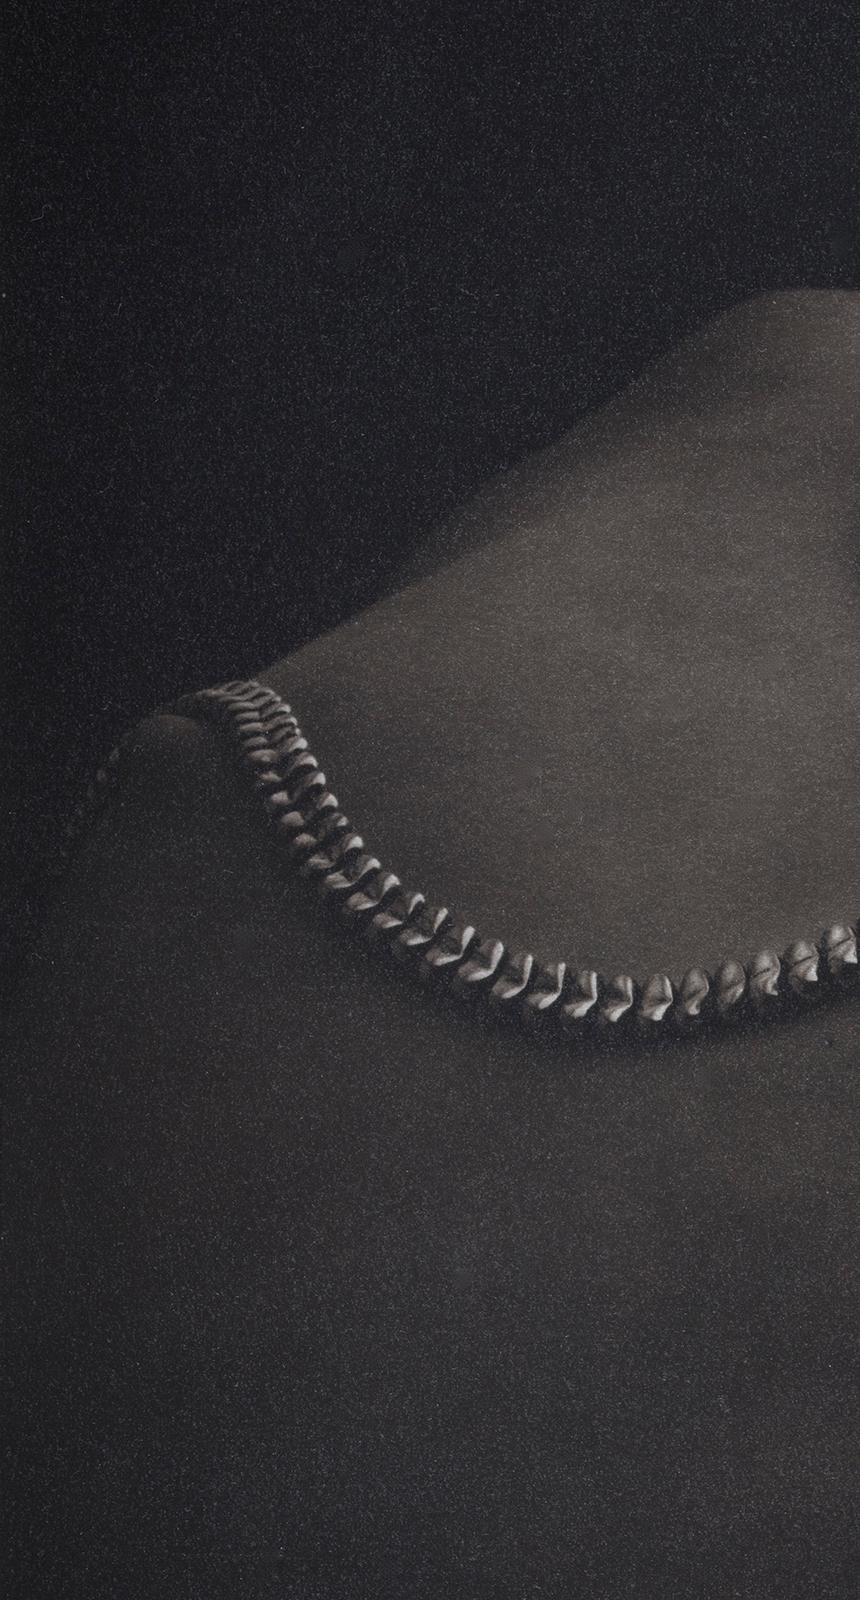 Snake-Platinum Palladium print on vellum over silver, A/P, Limited edition, Jewelry - Black Black and White Photograph by Ian Sanderson